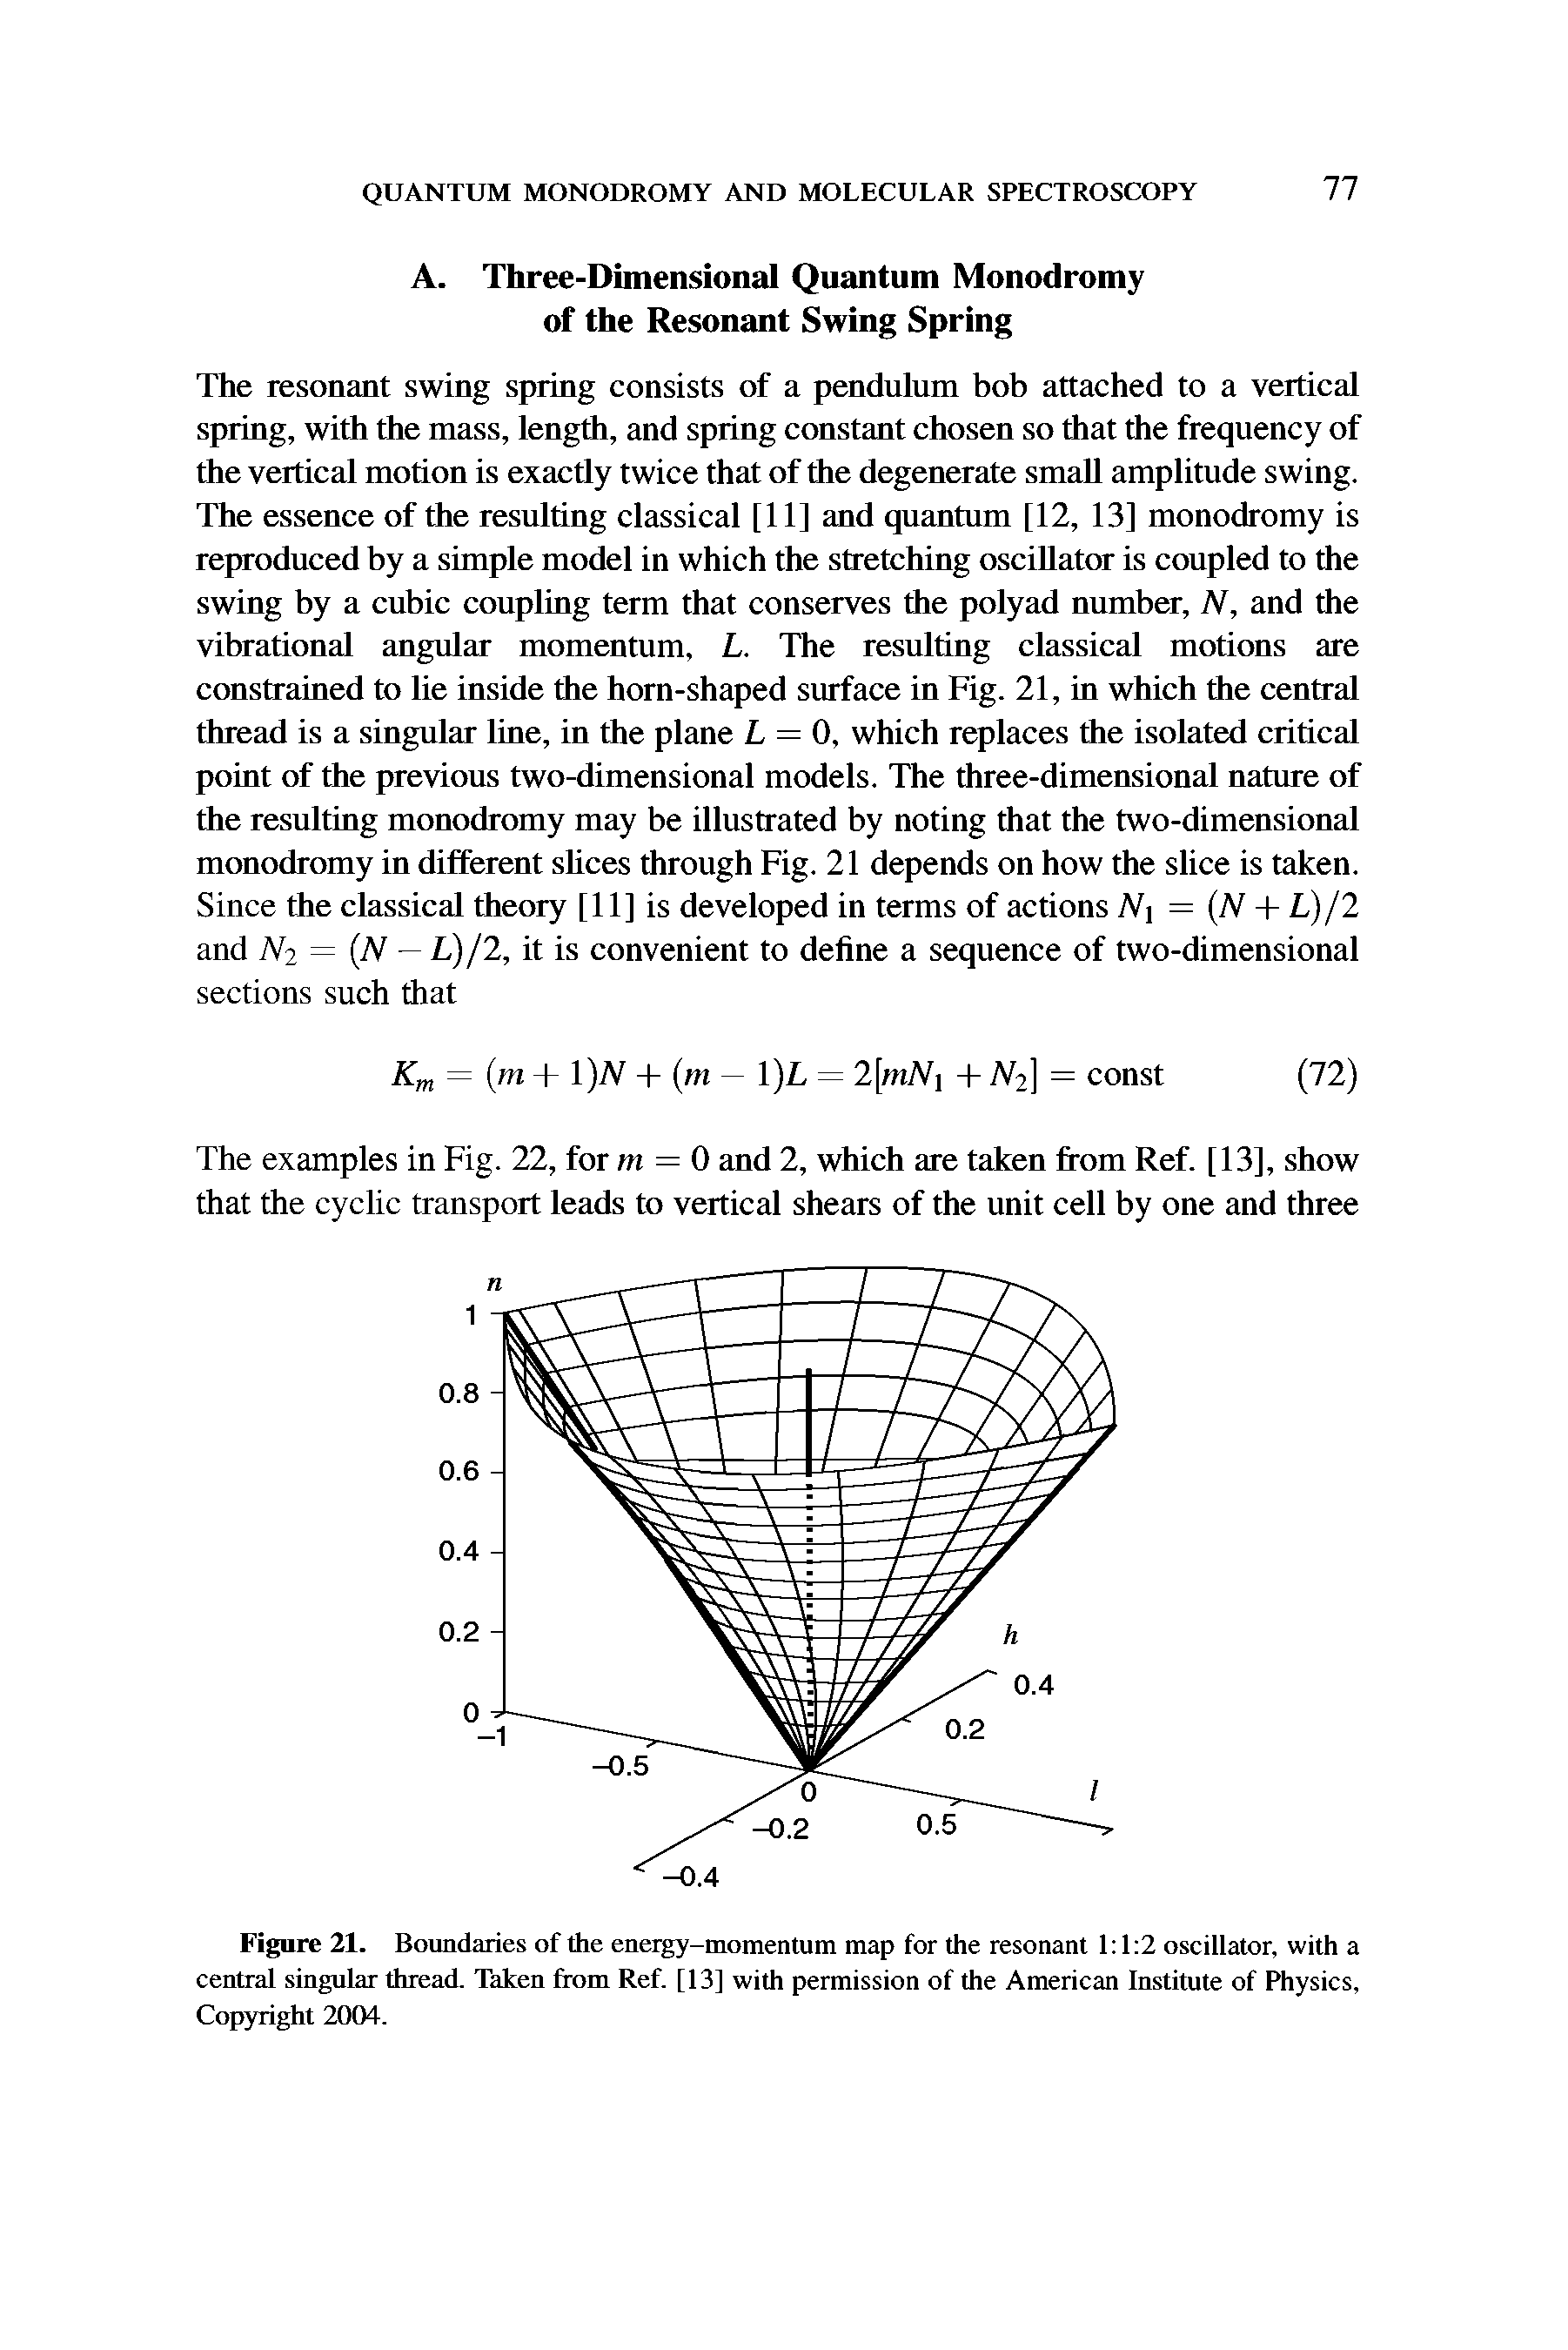 Figure 21. Boundaries of the energy-momentum map for the resonant 1 1 2 oscillator, with a central singular thread. Taken from Ref. [13] with permission of the American Institute of Physics, Copyright 2004.